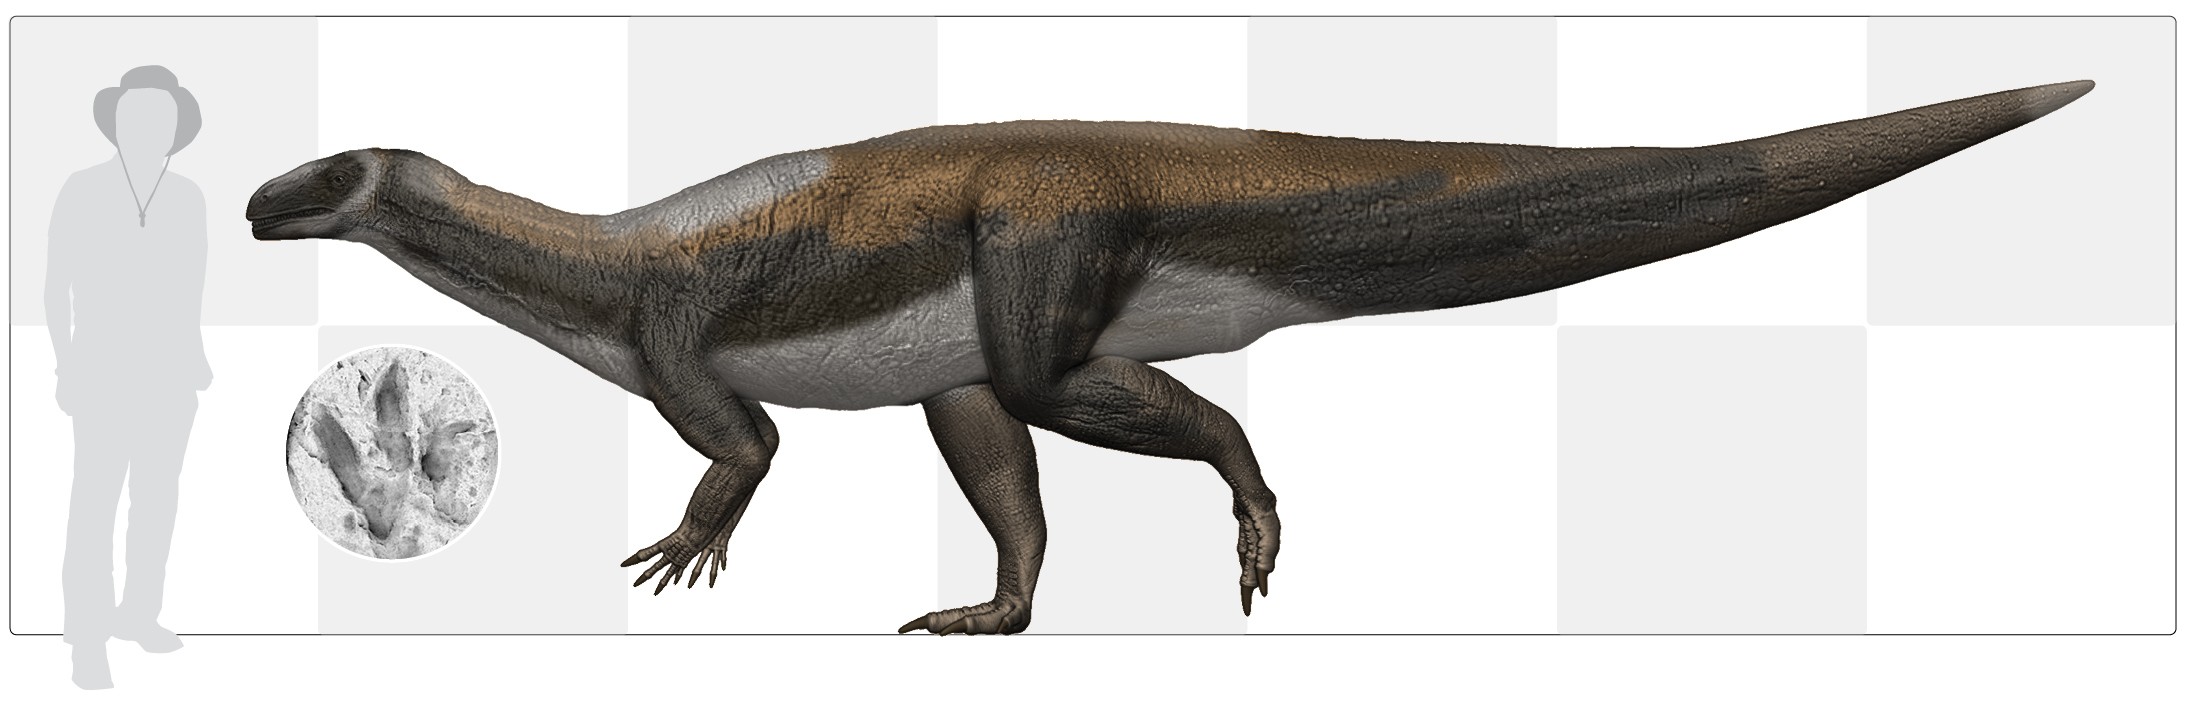 A person standing next to a mid-sized dinosaur